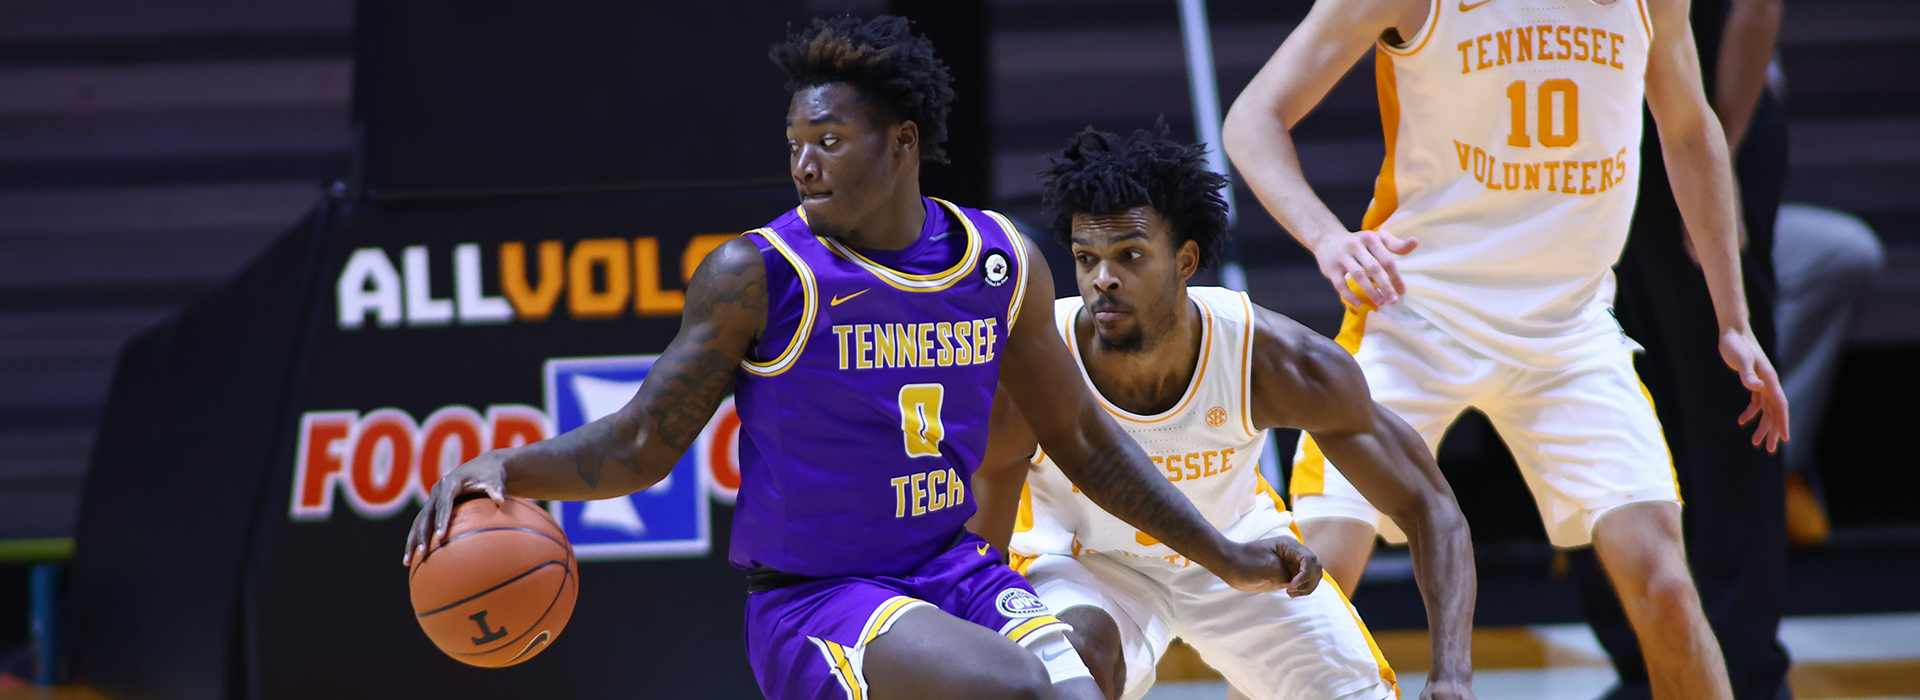 Golden Eagles fall to No. 10 Tennessee in Knoxville